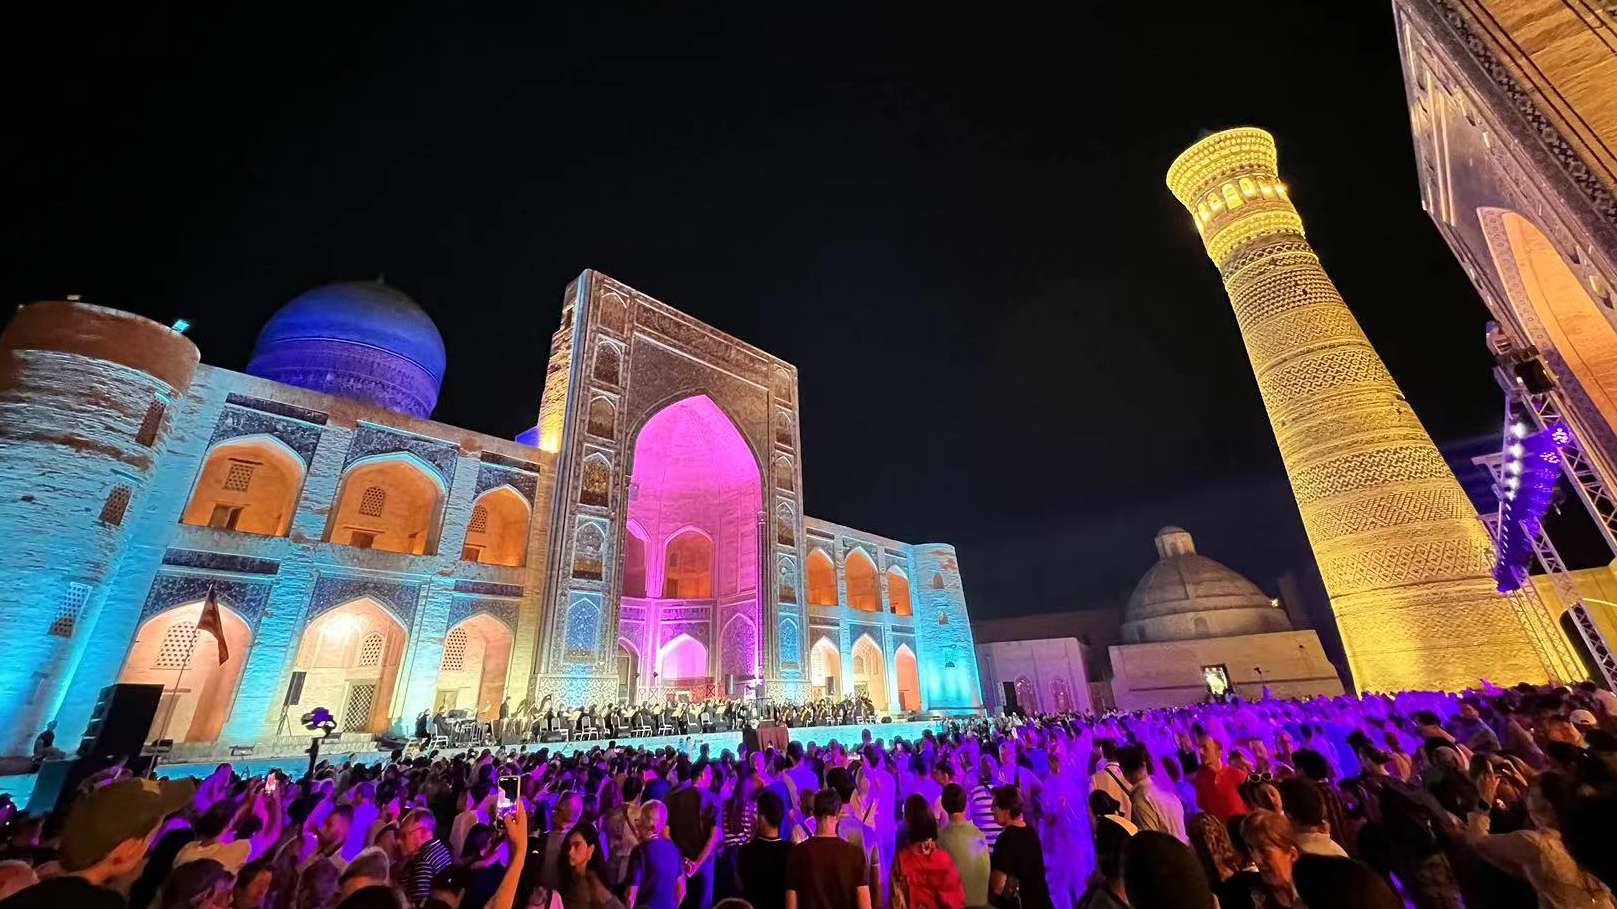 Tourism boom in Uzbekistan, revival of the ancient Silk Road